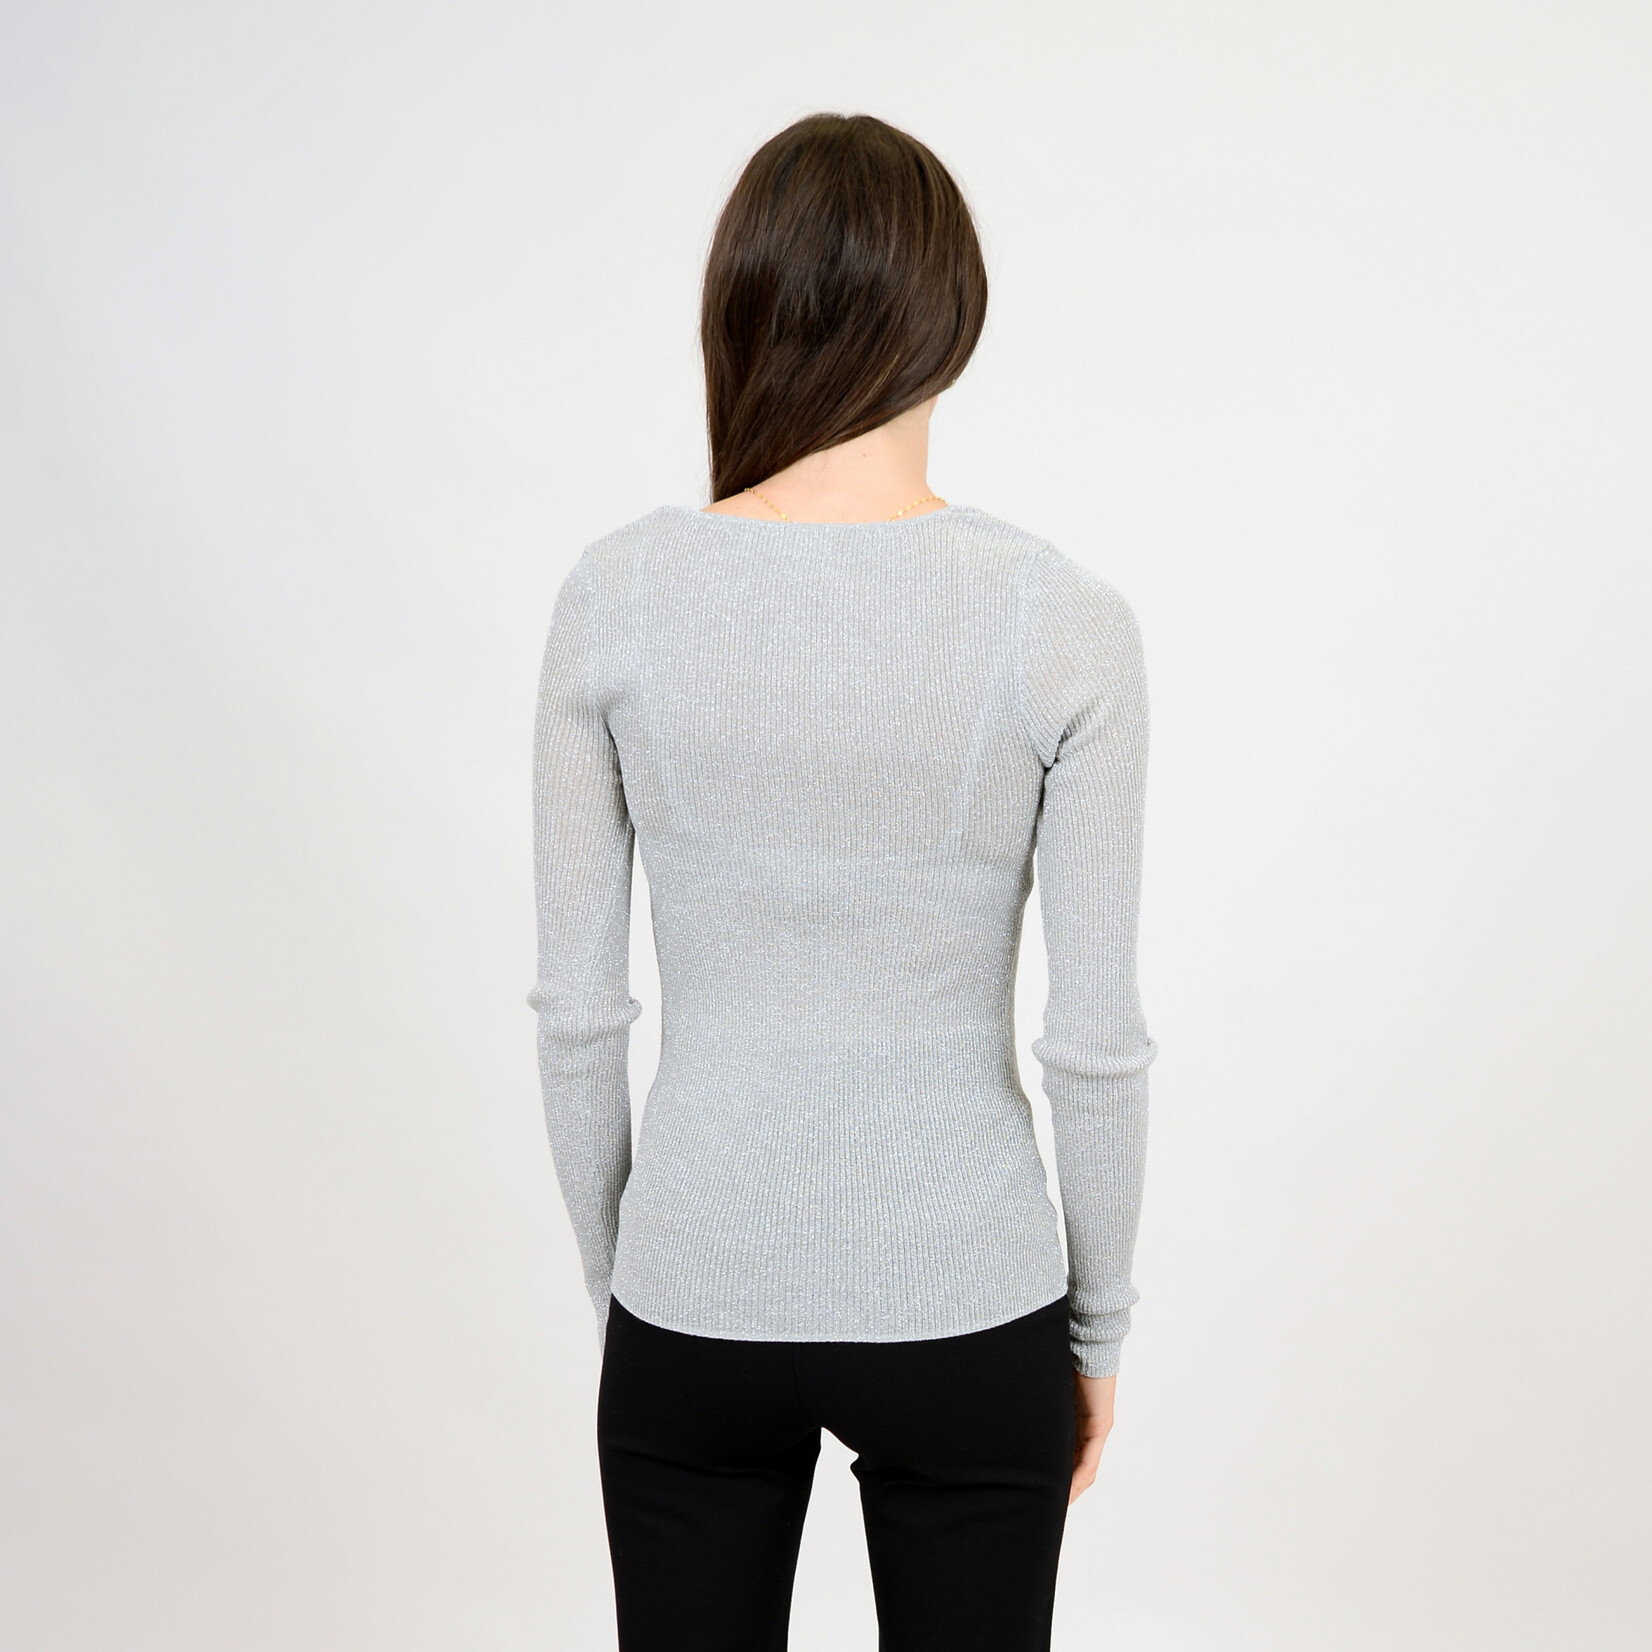 Rd Style Astra Square Neck Top